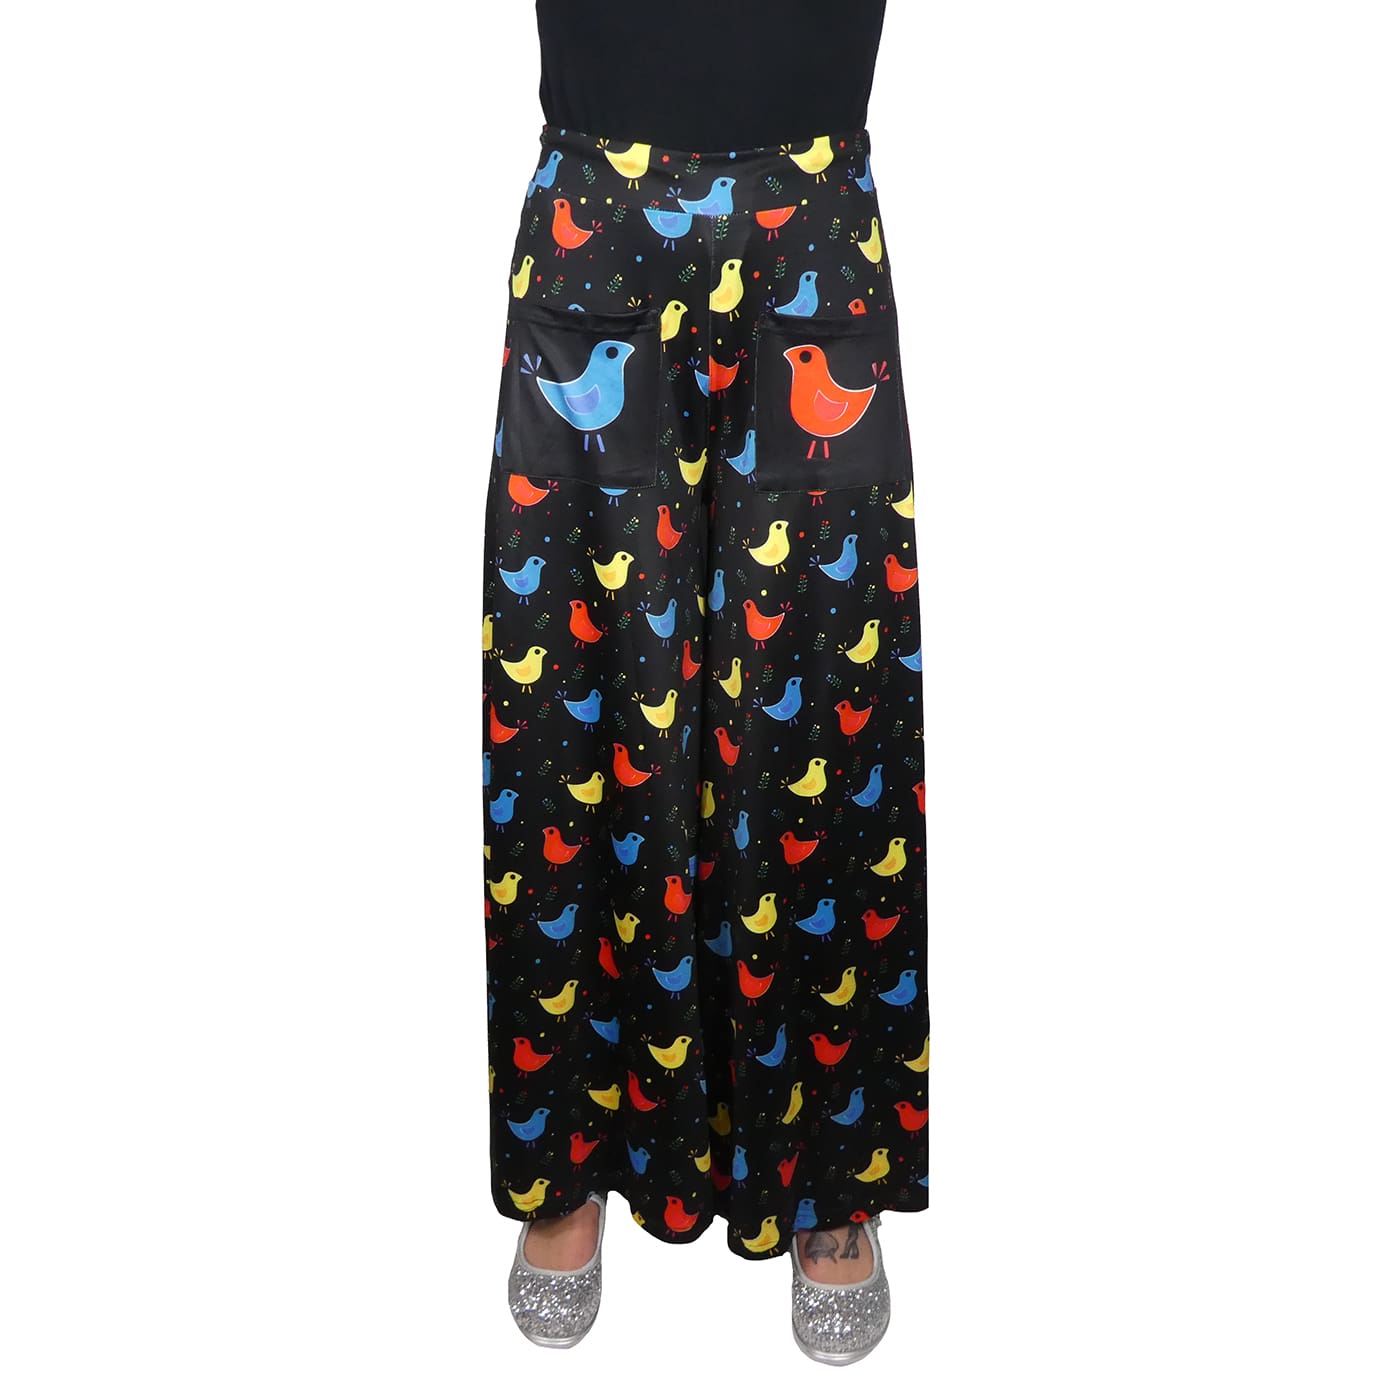 Chirp Wide Leg Pants by RainbowsAndFairies.com.au (Cute Birds - Partridge Family Inspired - Pants With Pockets - Pallazo Pants - Flares) - SKU: CL_WIDEL_CHIRP_ORG - Pic-01